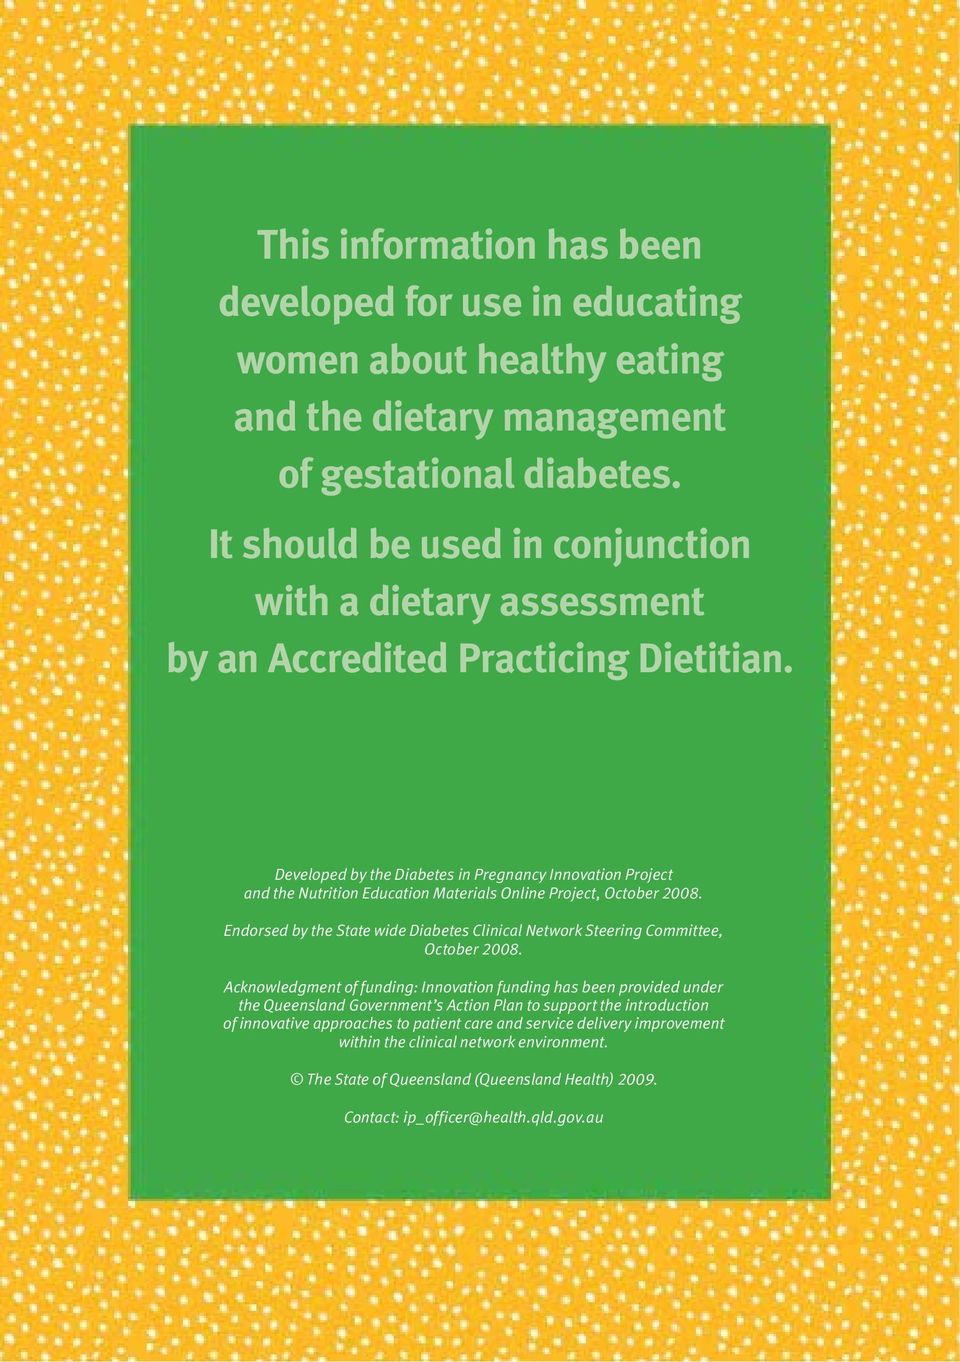 Developed by the Diabetes in Pregnancy Innovation Project and the Nutrition Education Materials Online Project, October 2008.